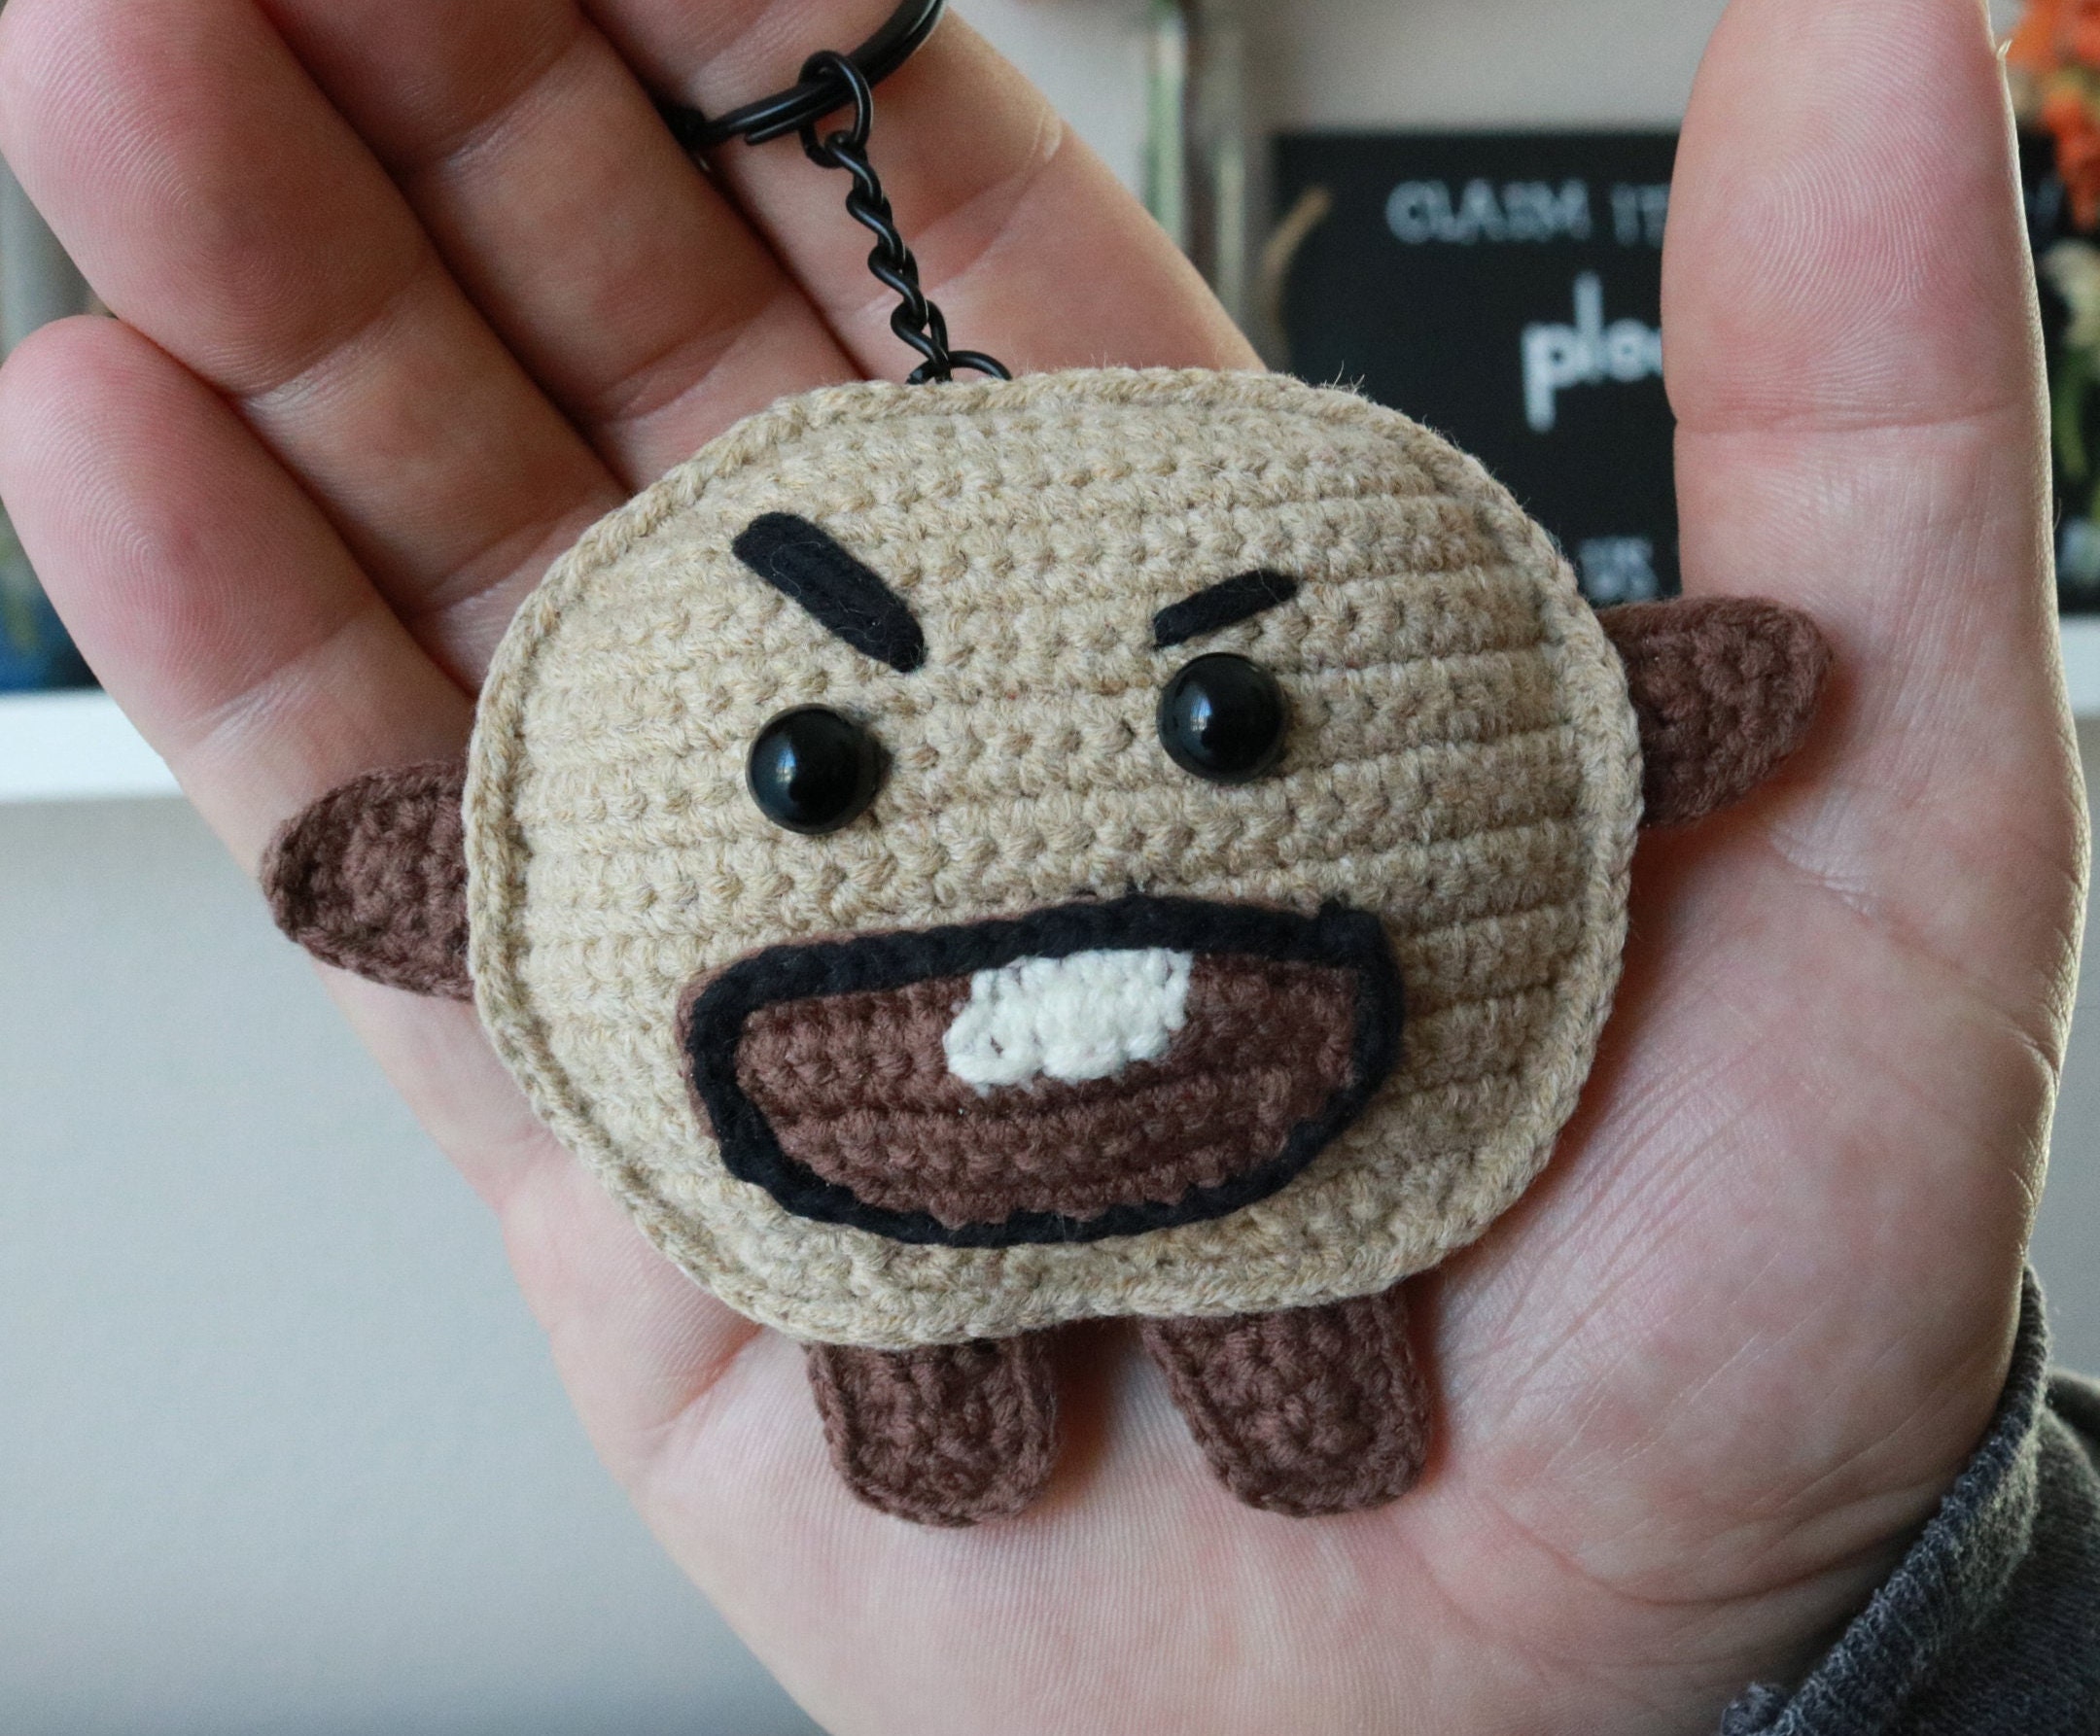 Hey, I made a Shooky plush from the BT21 universe. I'm a complete beginner,  but since I don't have spare money to spend on BT21 plushies, I decided to  make my own.